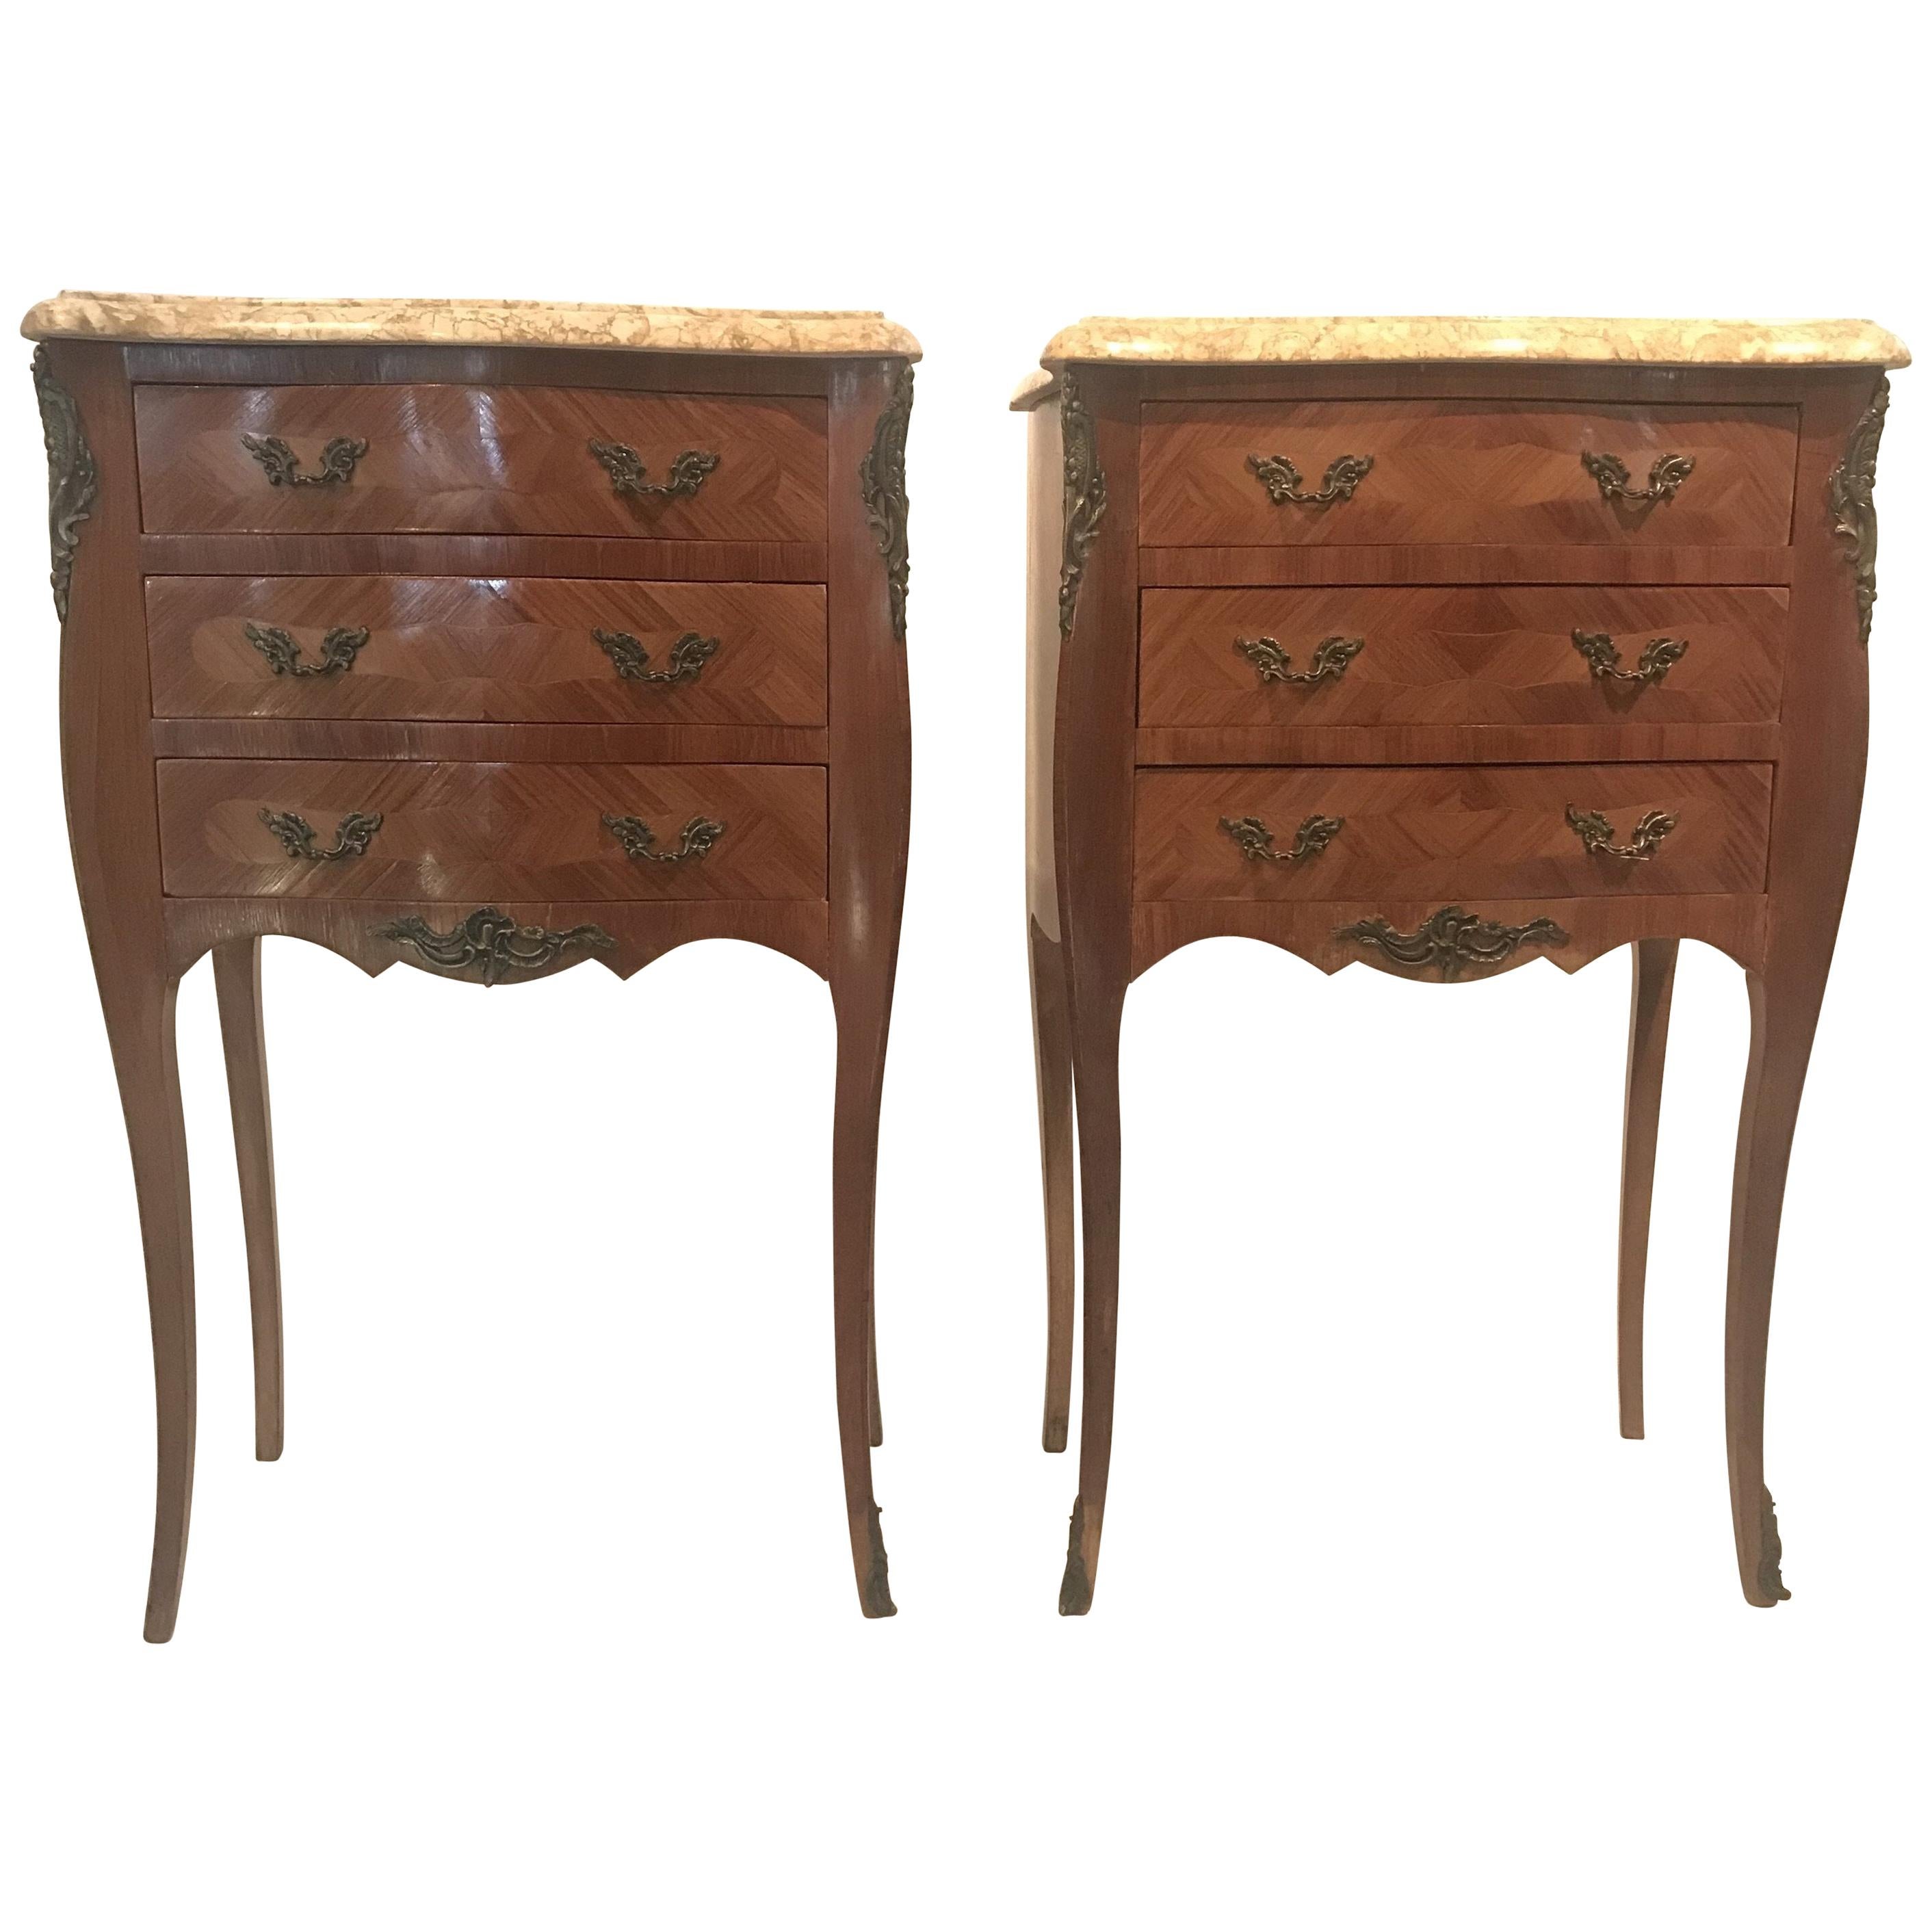 Pretty Pair of French Inlaid Marble-Top Nightstands with Three Drawers